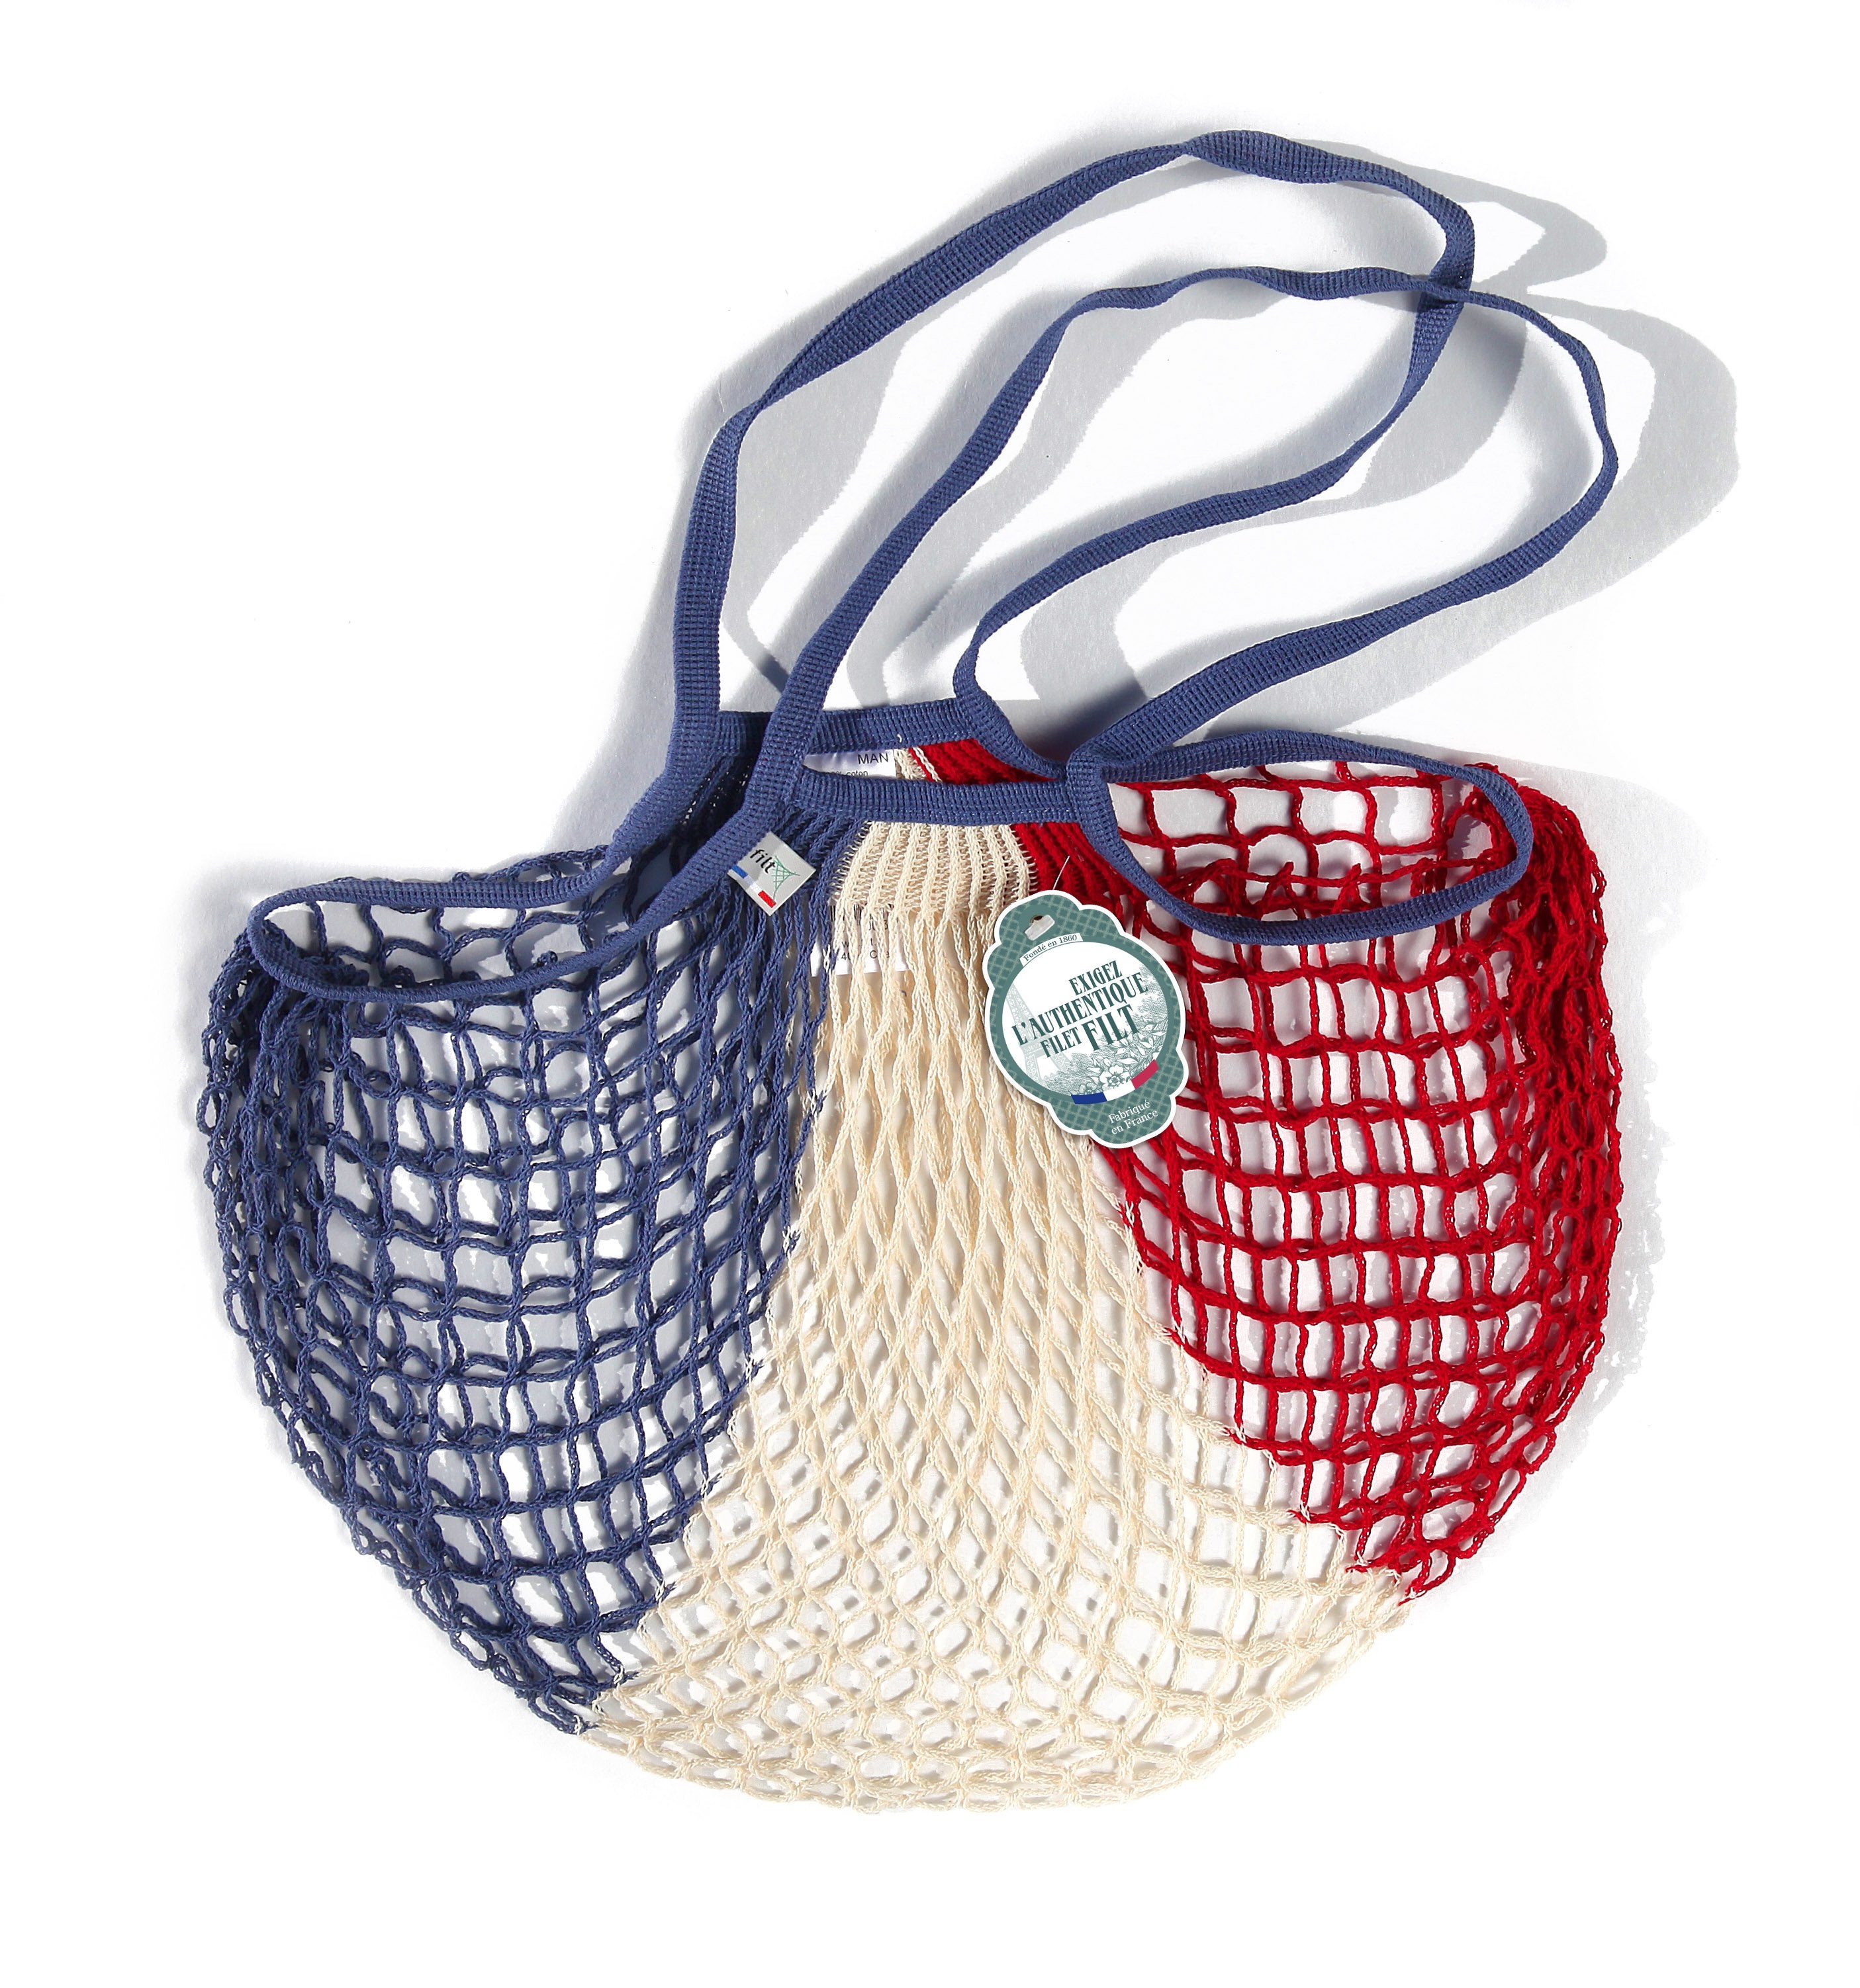 Filt French Market Tote Bag Medium in Red, White & Blue – French